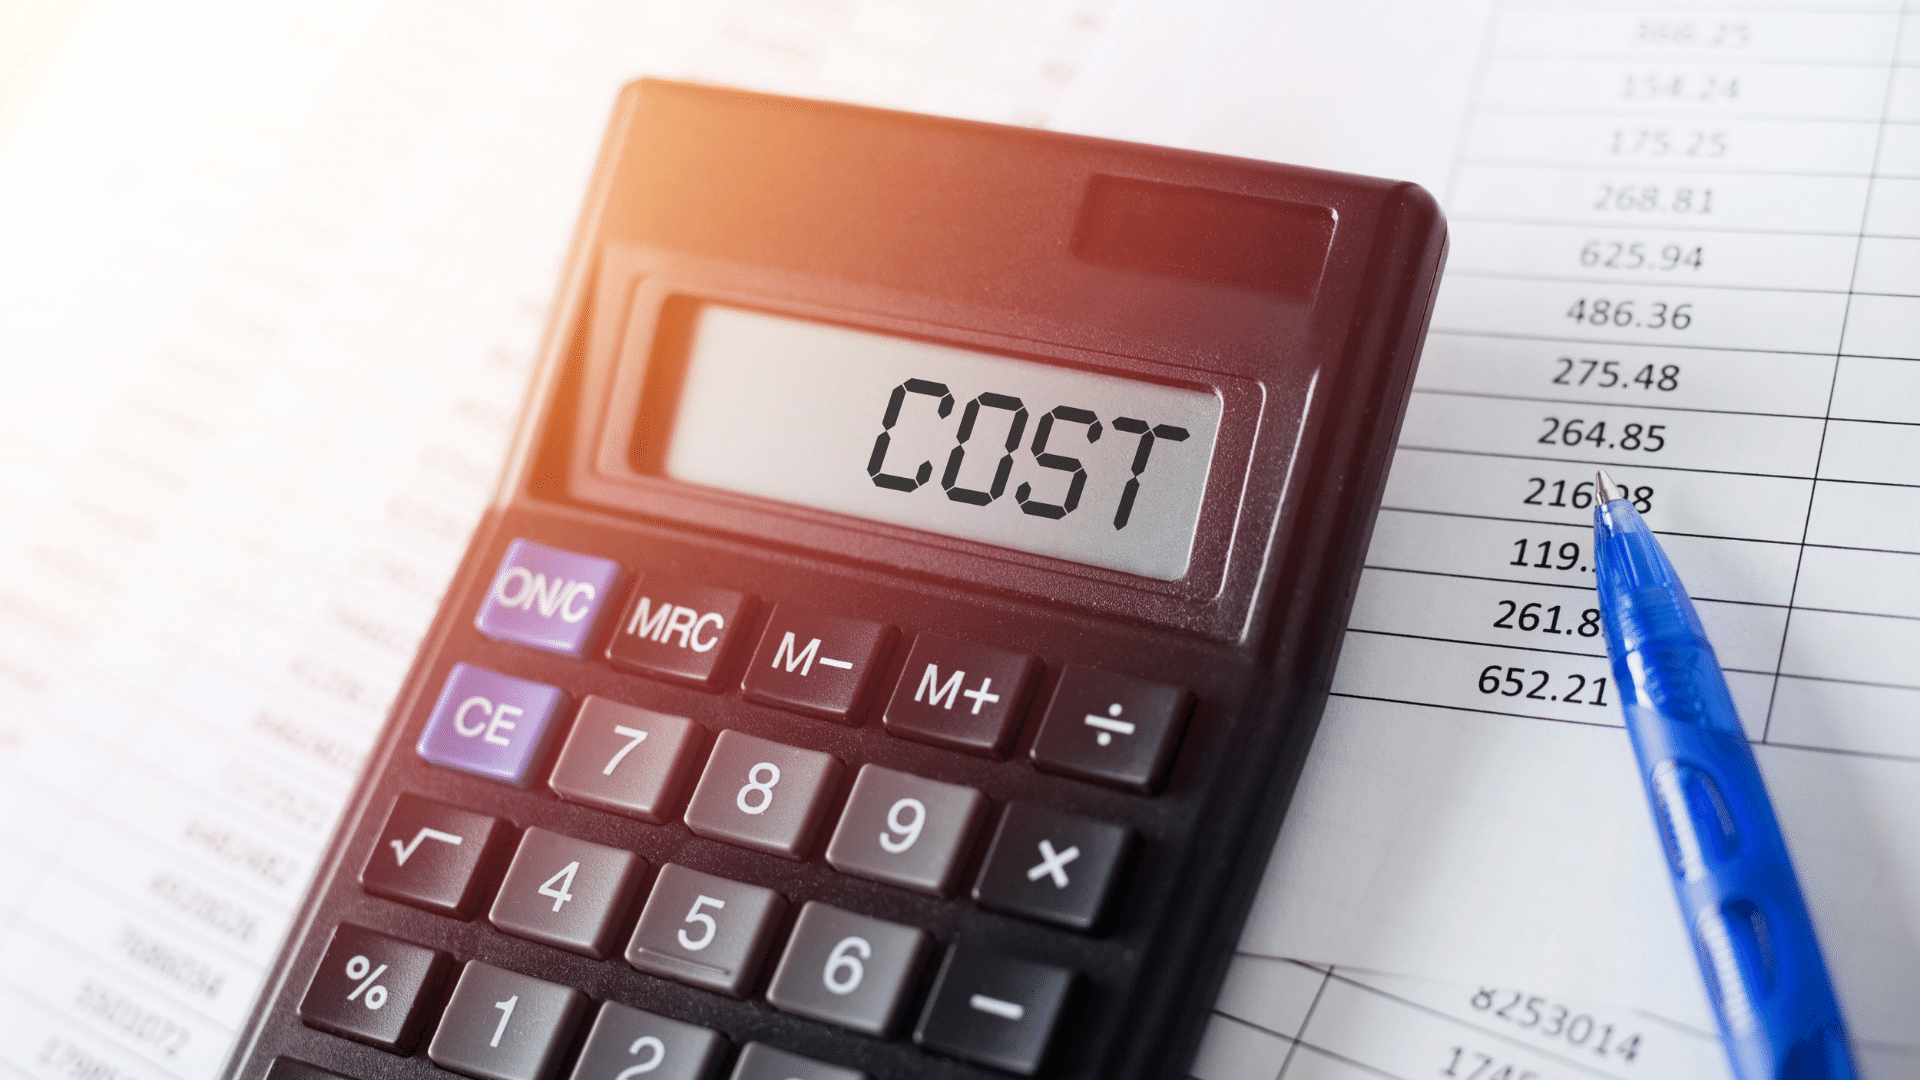 Cost management during an economic downturn